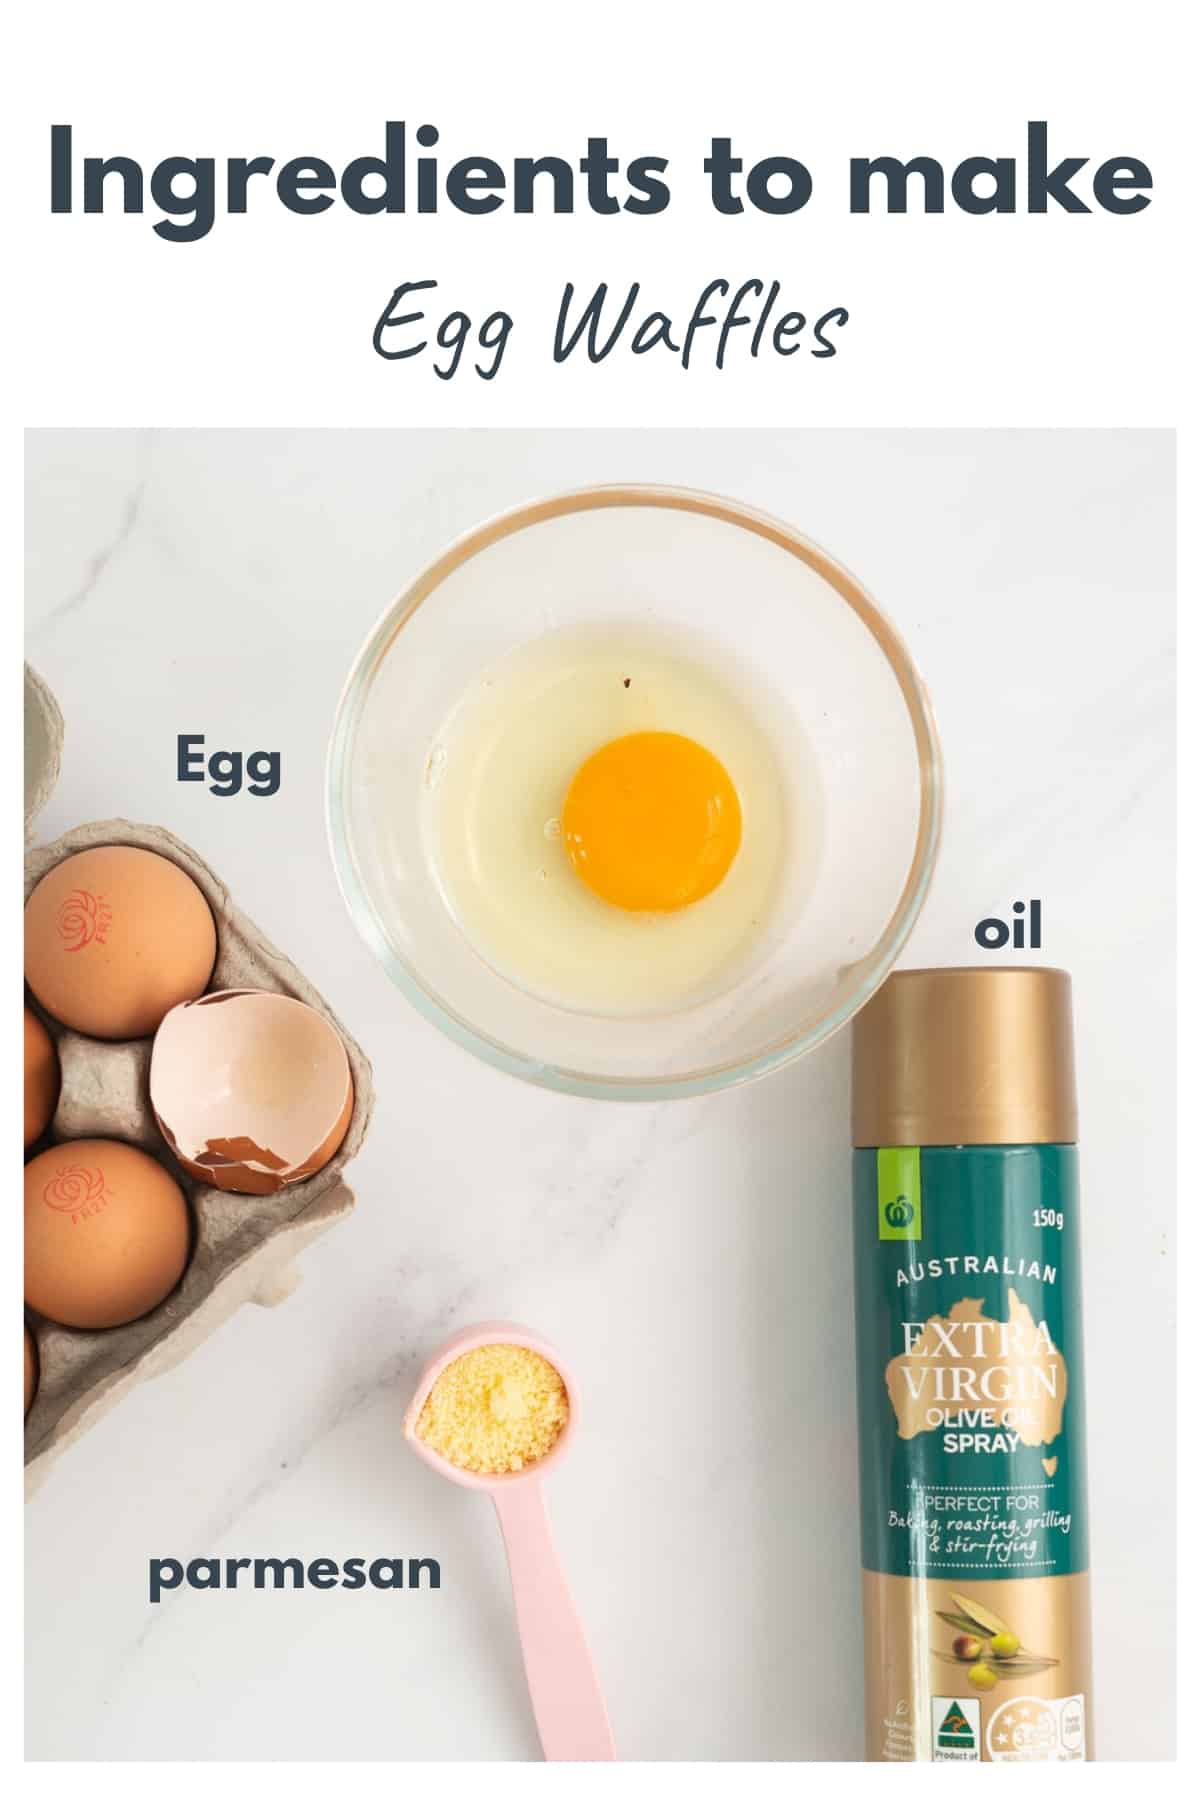 Ingredients to make egg waffles laid out on a marble bench top with text overlay.